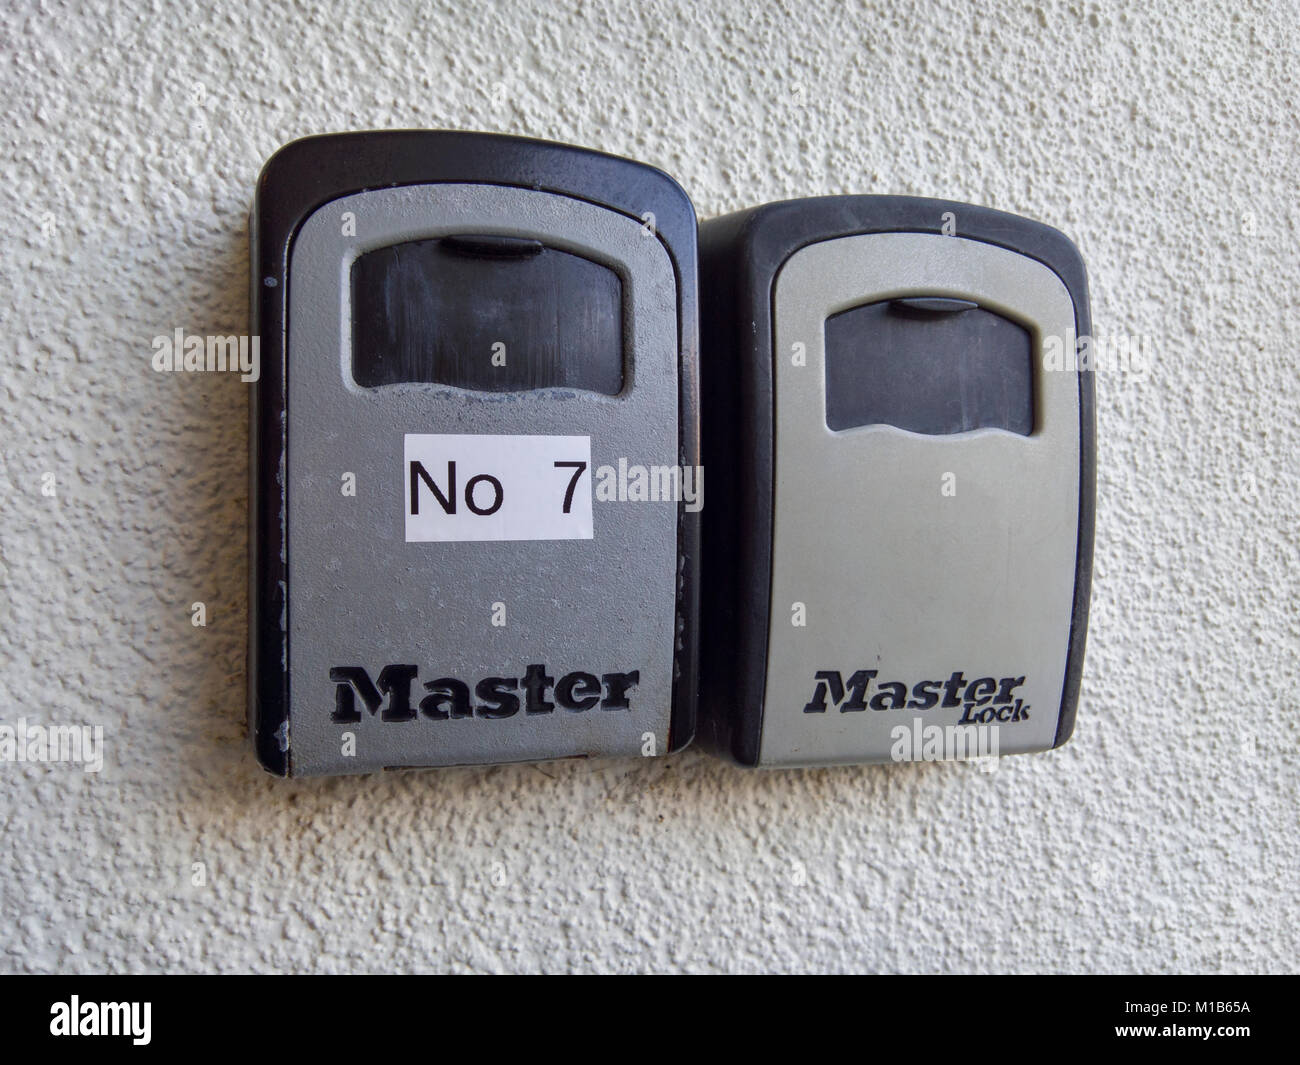 A pair of Master Lock combination key safes outside apartments. Stock Photo